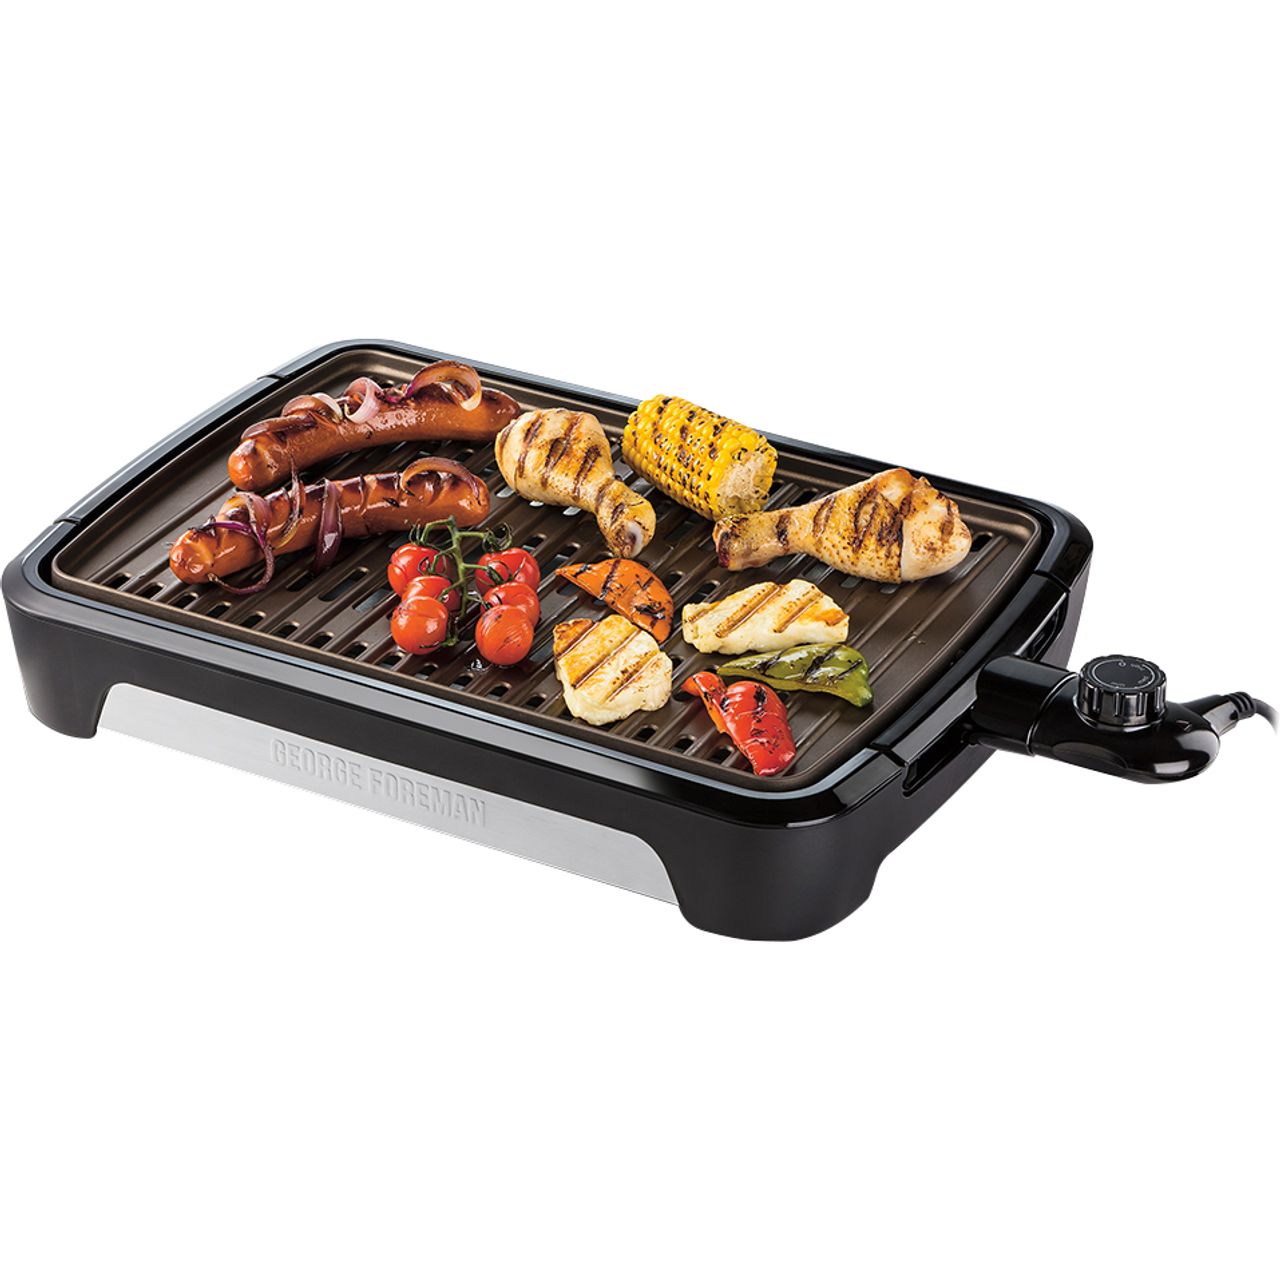 George Foreman Smoke-Less Grill 25850 Health Grill Review